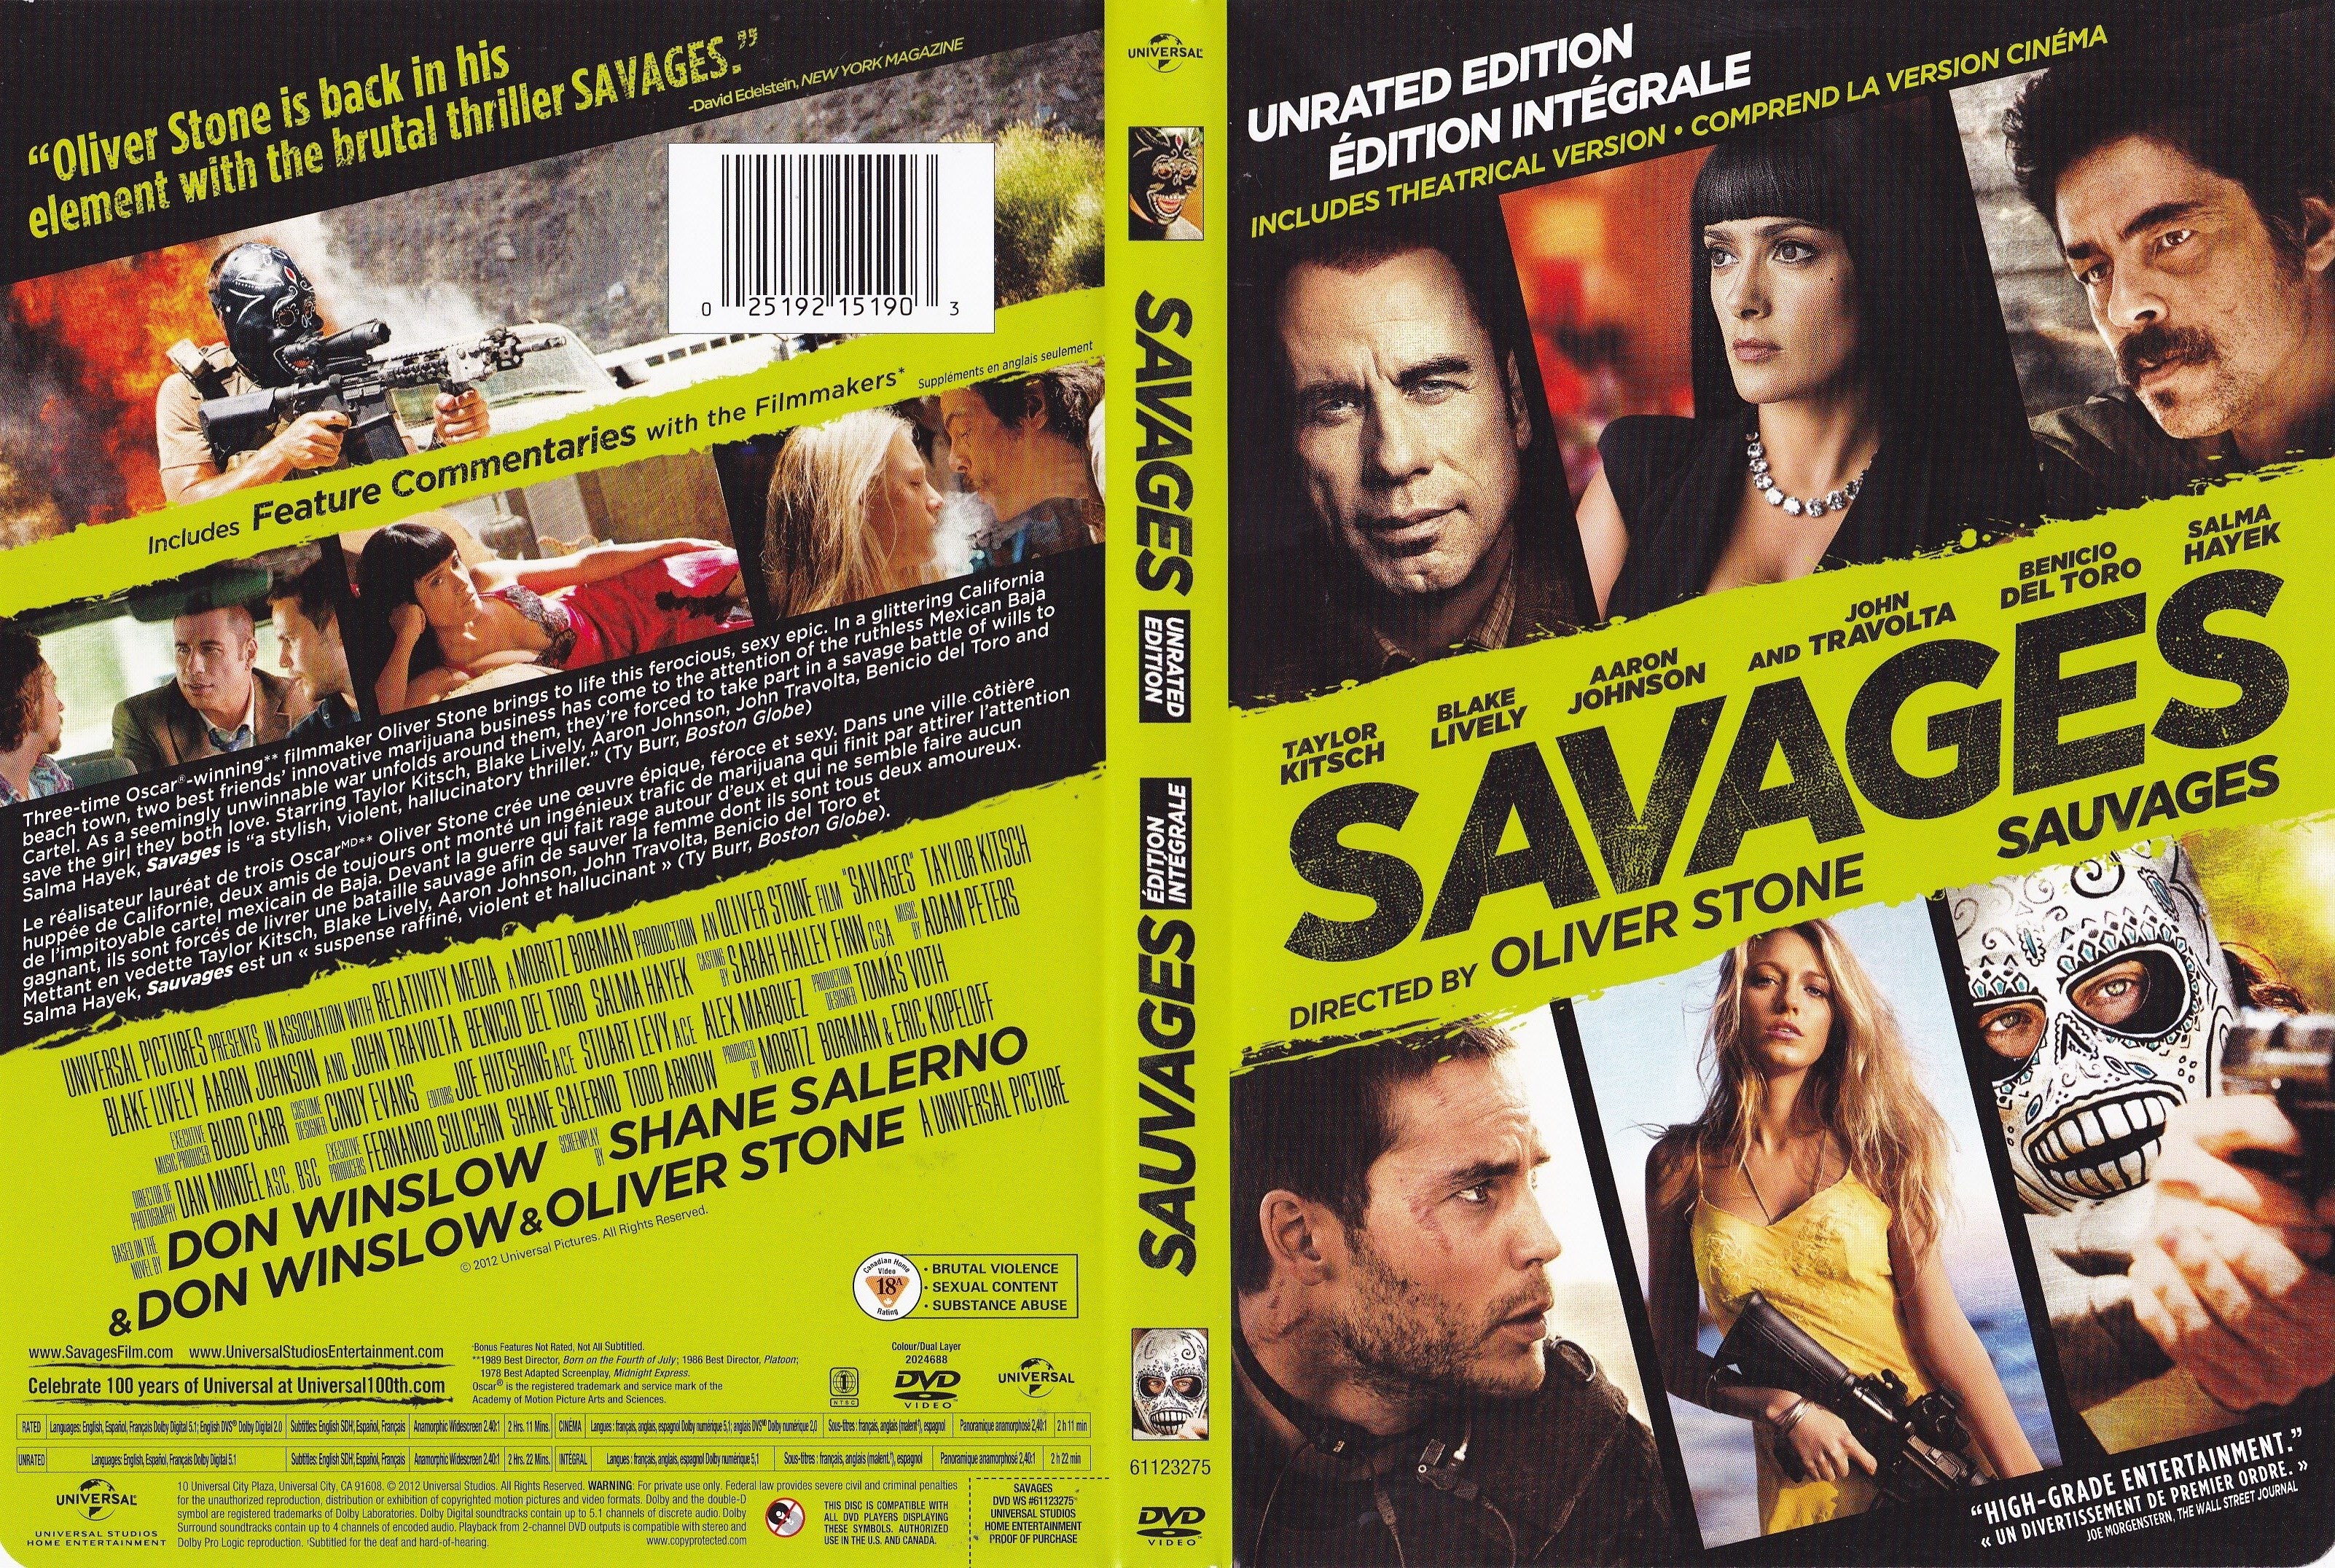 Jaquette DVD Savages - Sauvage (Canadienne)